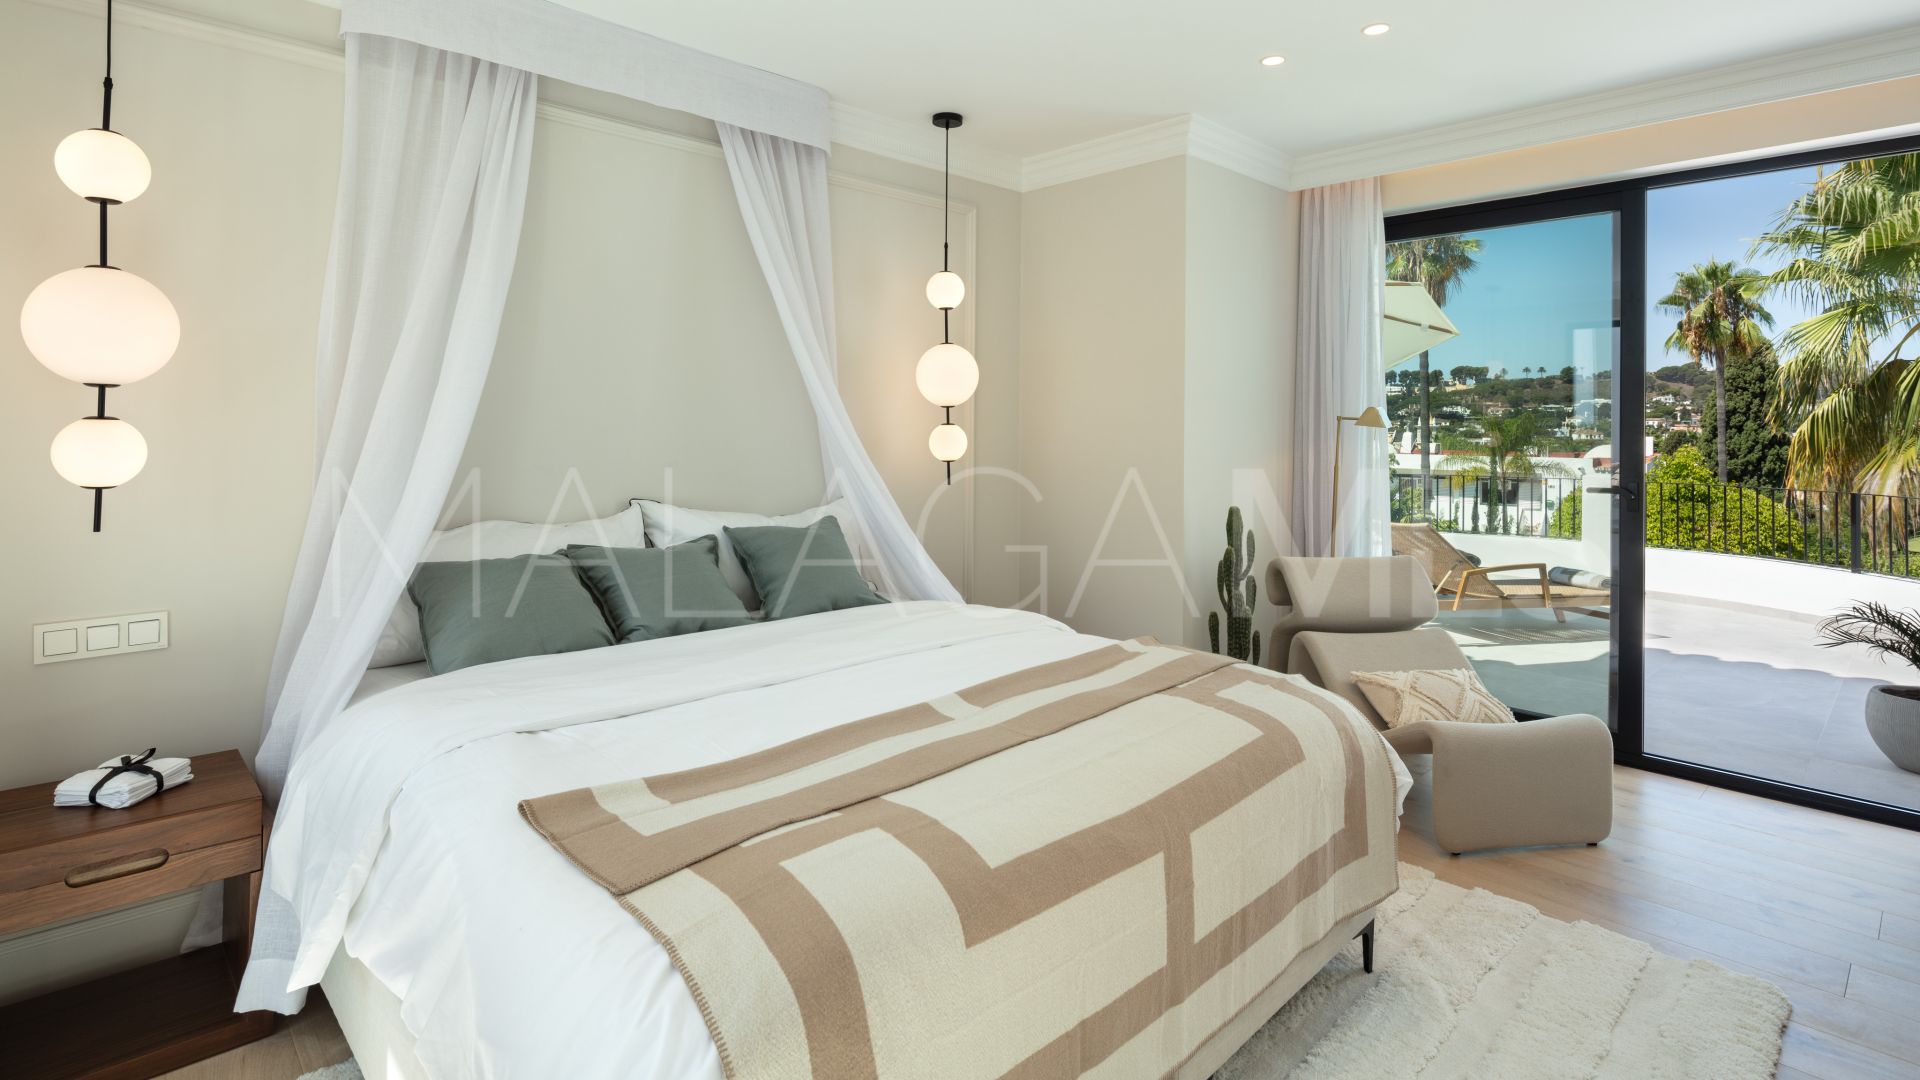 Villa for sale in Aloha with 5 bedrooms